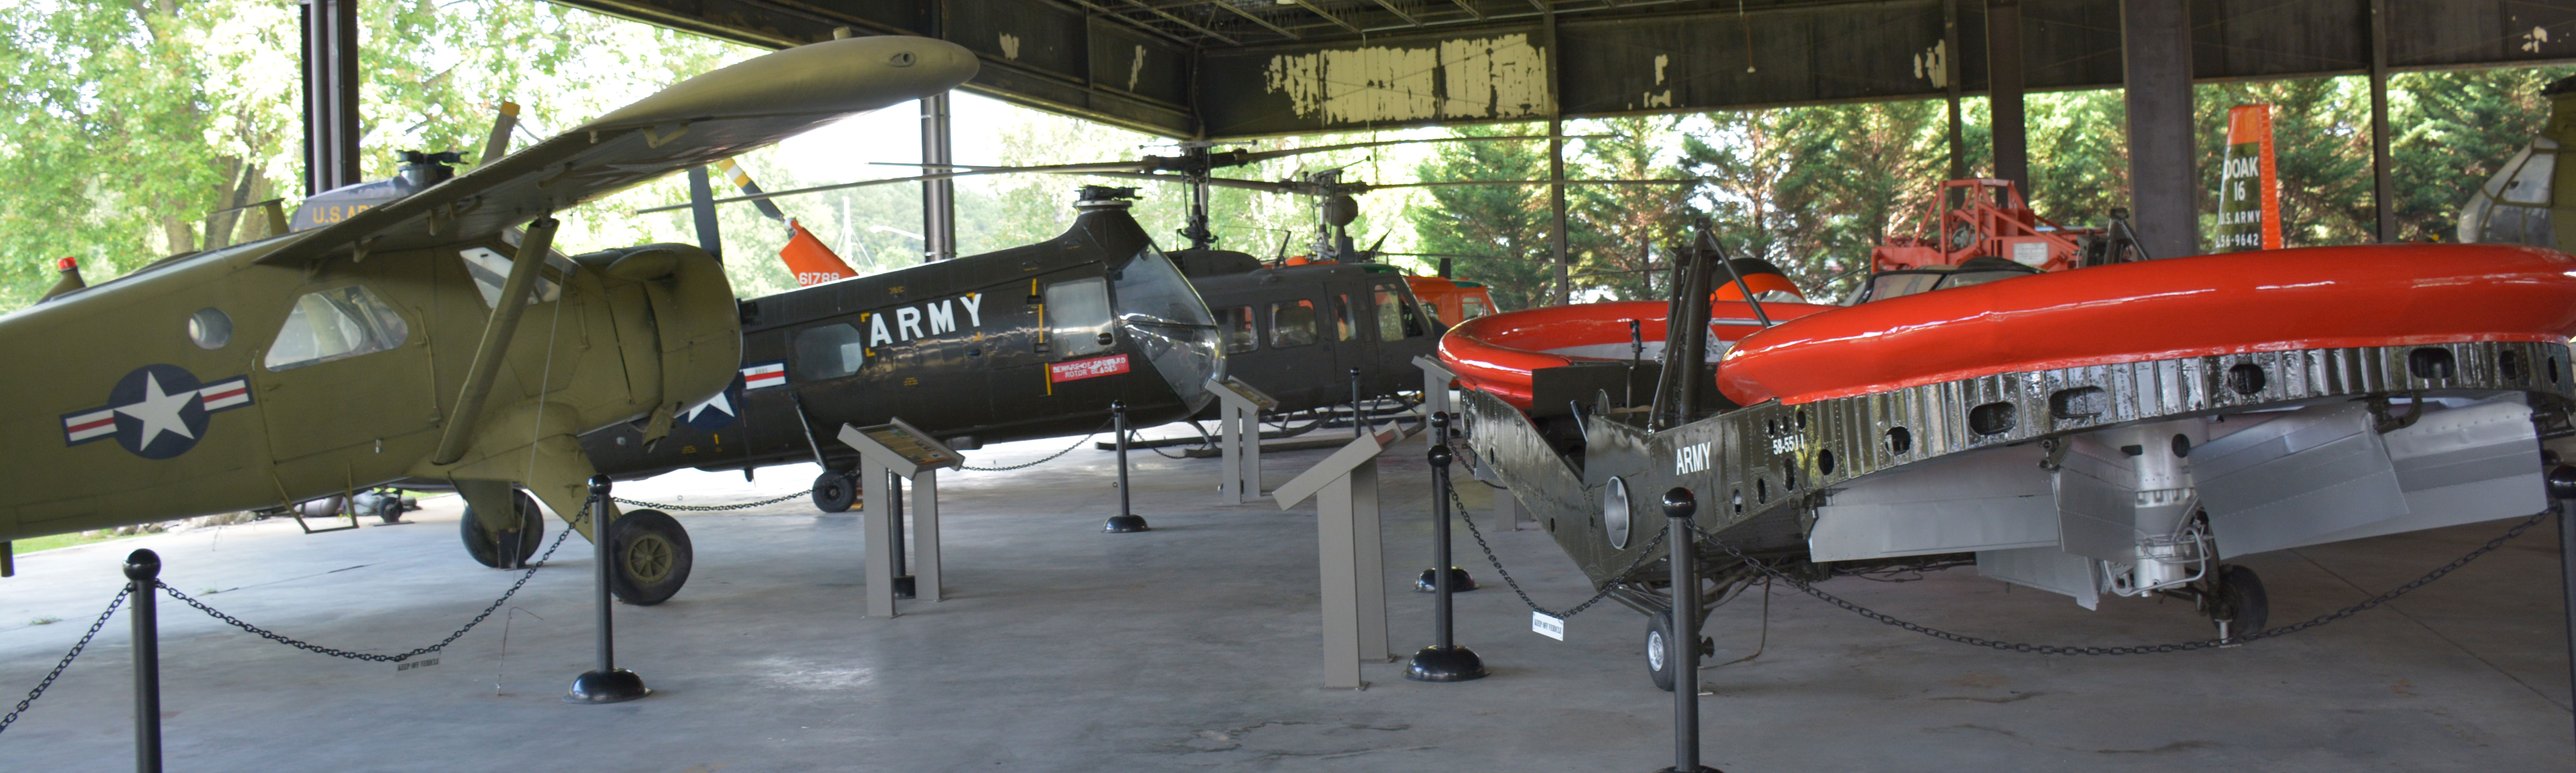 Image of the Aviation Pavilion that has planes, helicopters, and experimental vehicles.